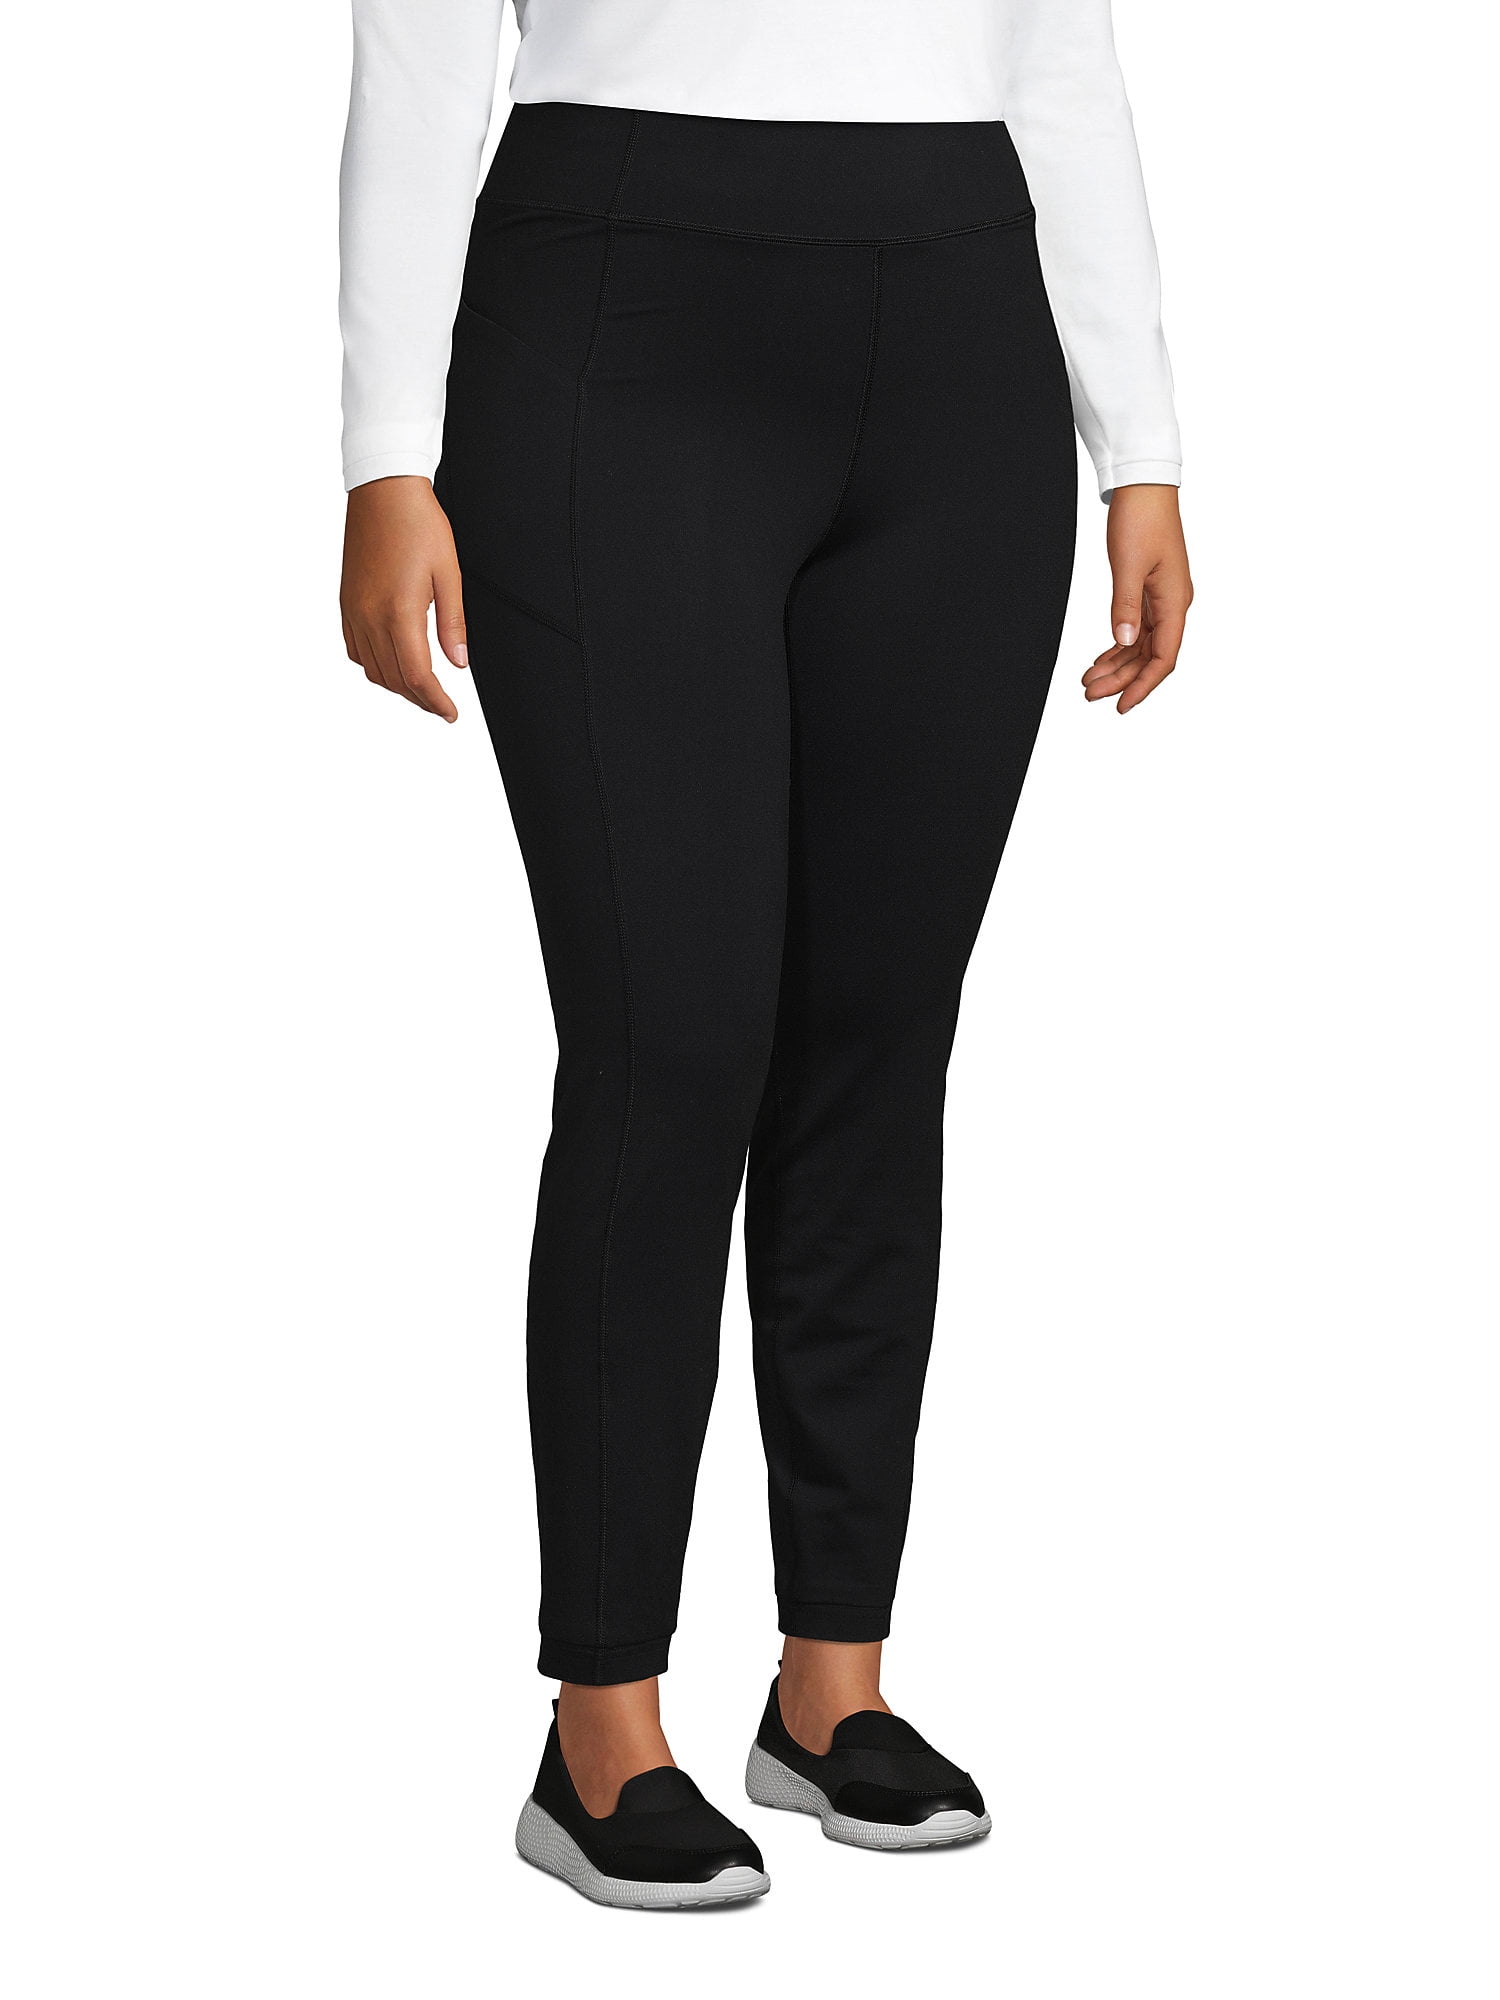 Women's Plus Size Active High Rise Compression Slimming Pocket